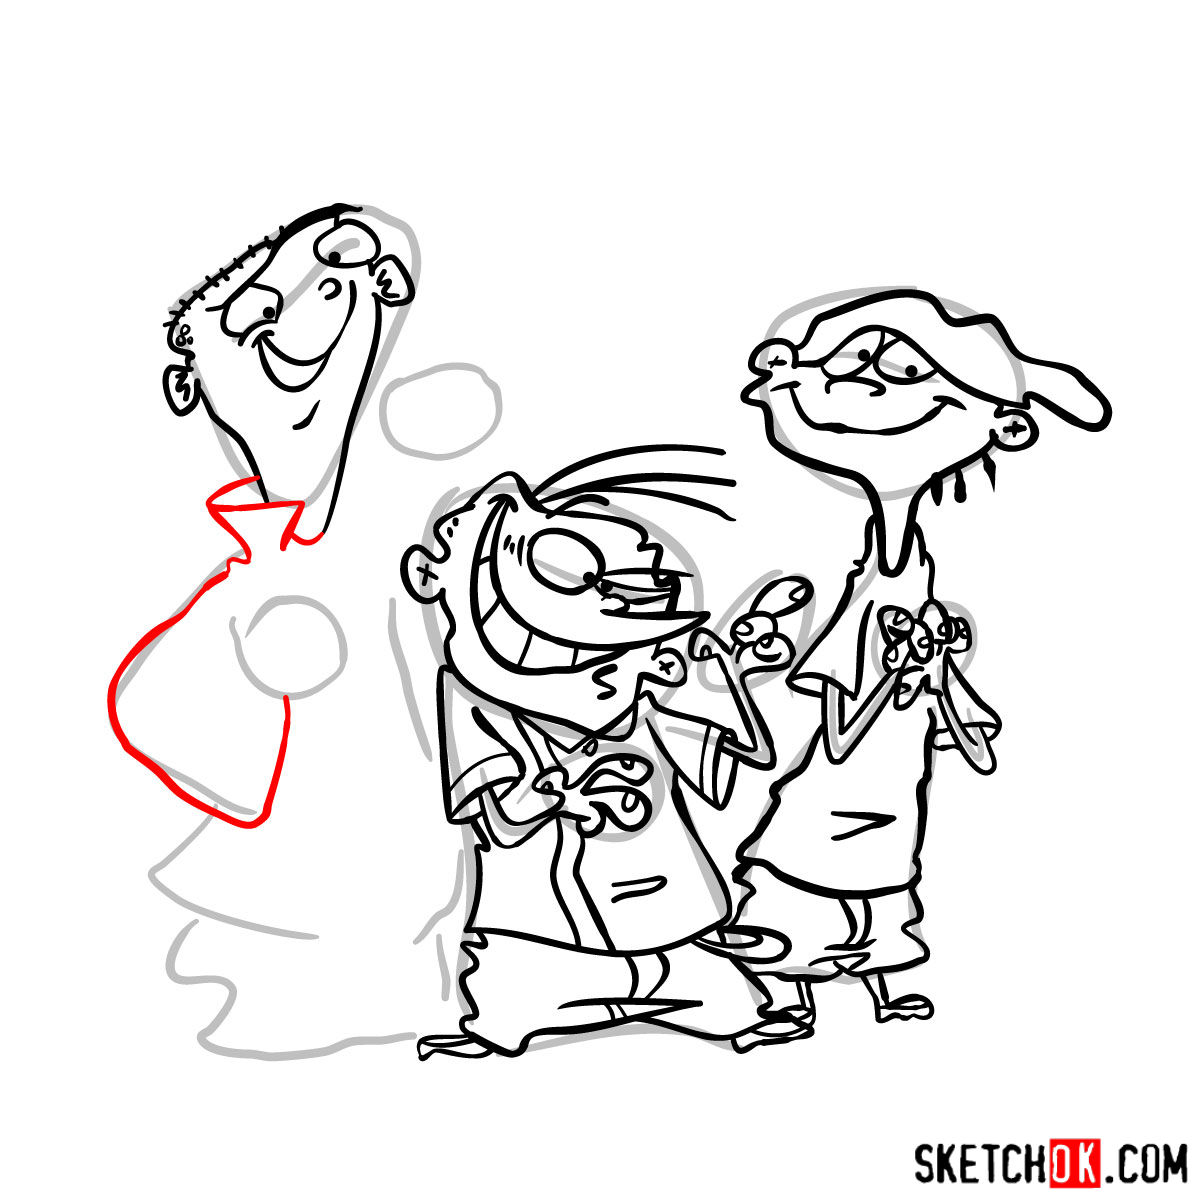 How to draw Ed, Edd and Eddy together - step 23